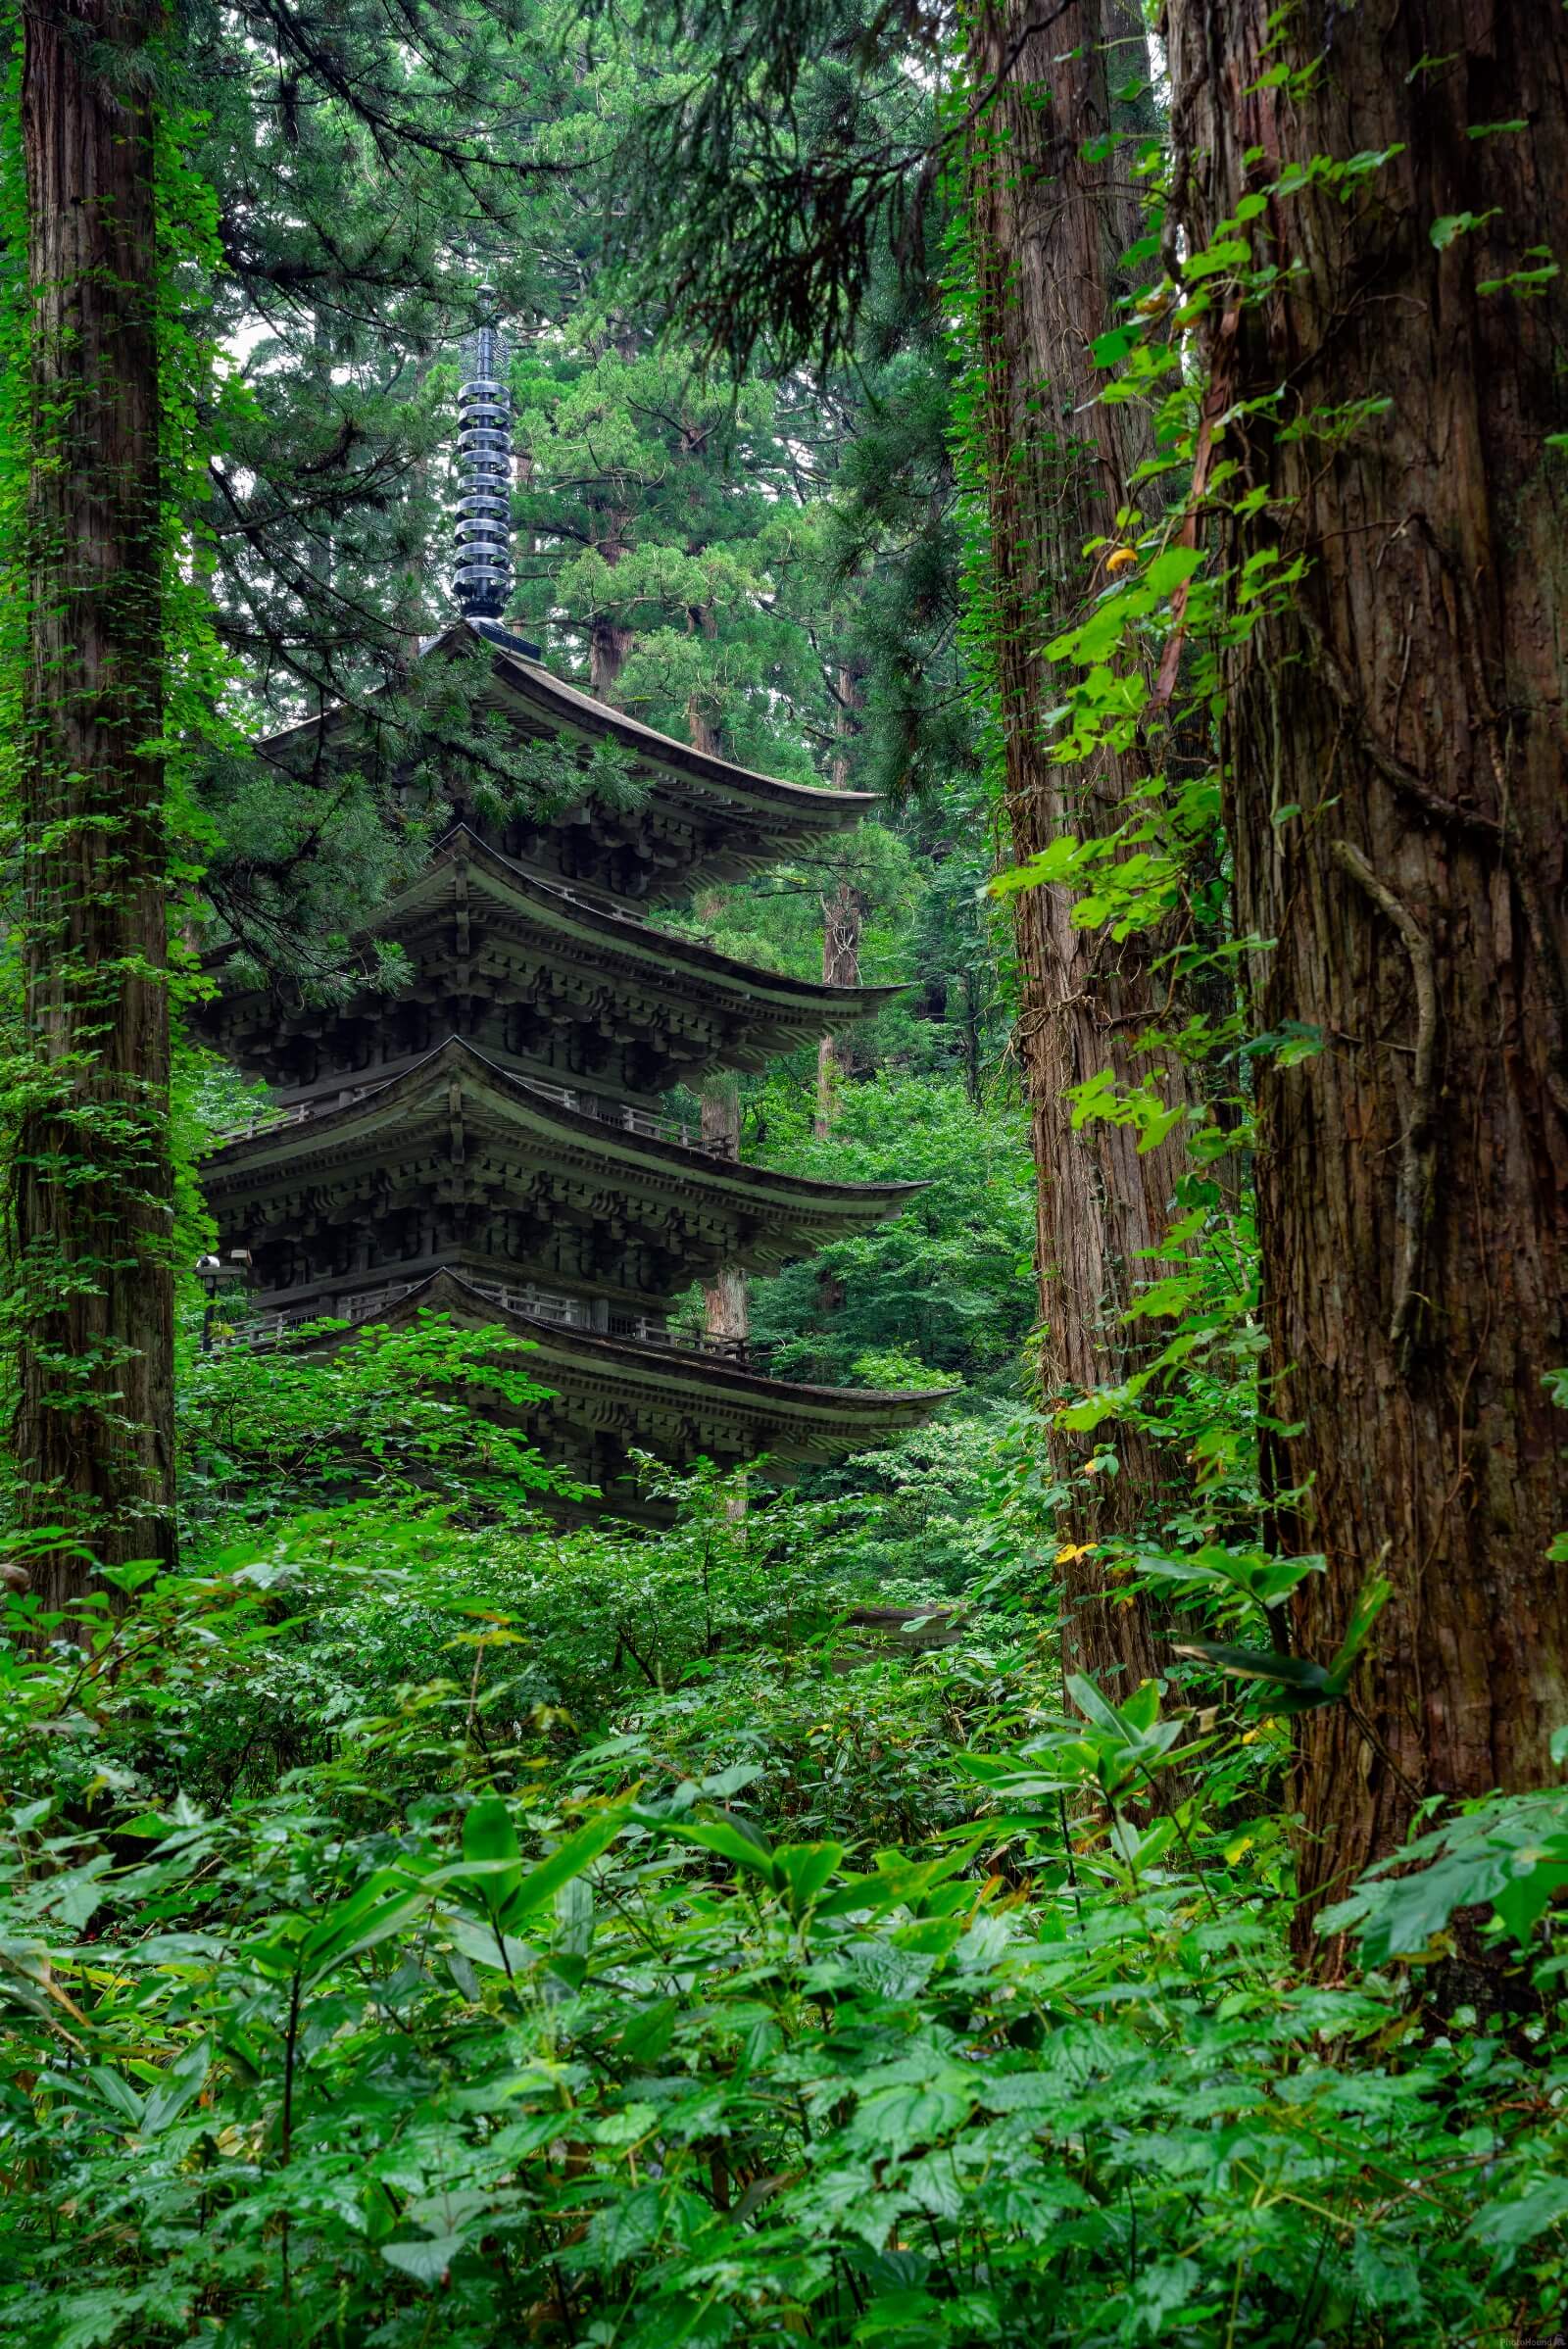 Image of Five-Storied Pagoda Of Mount Haguro by Colette English